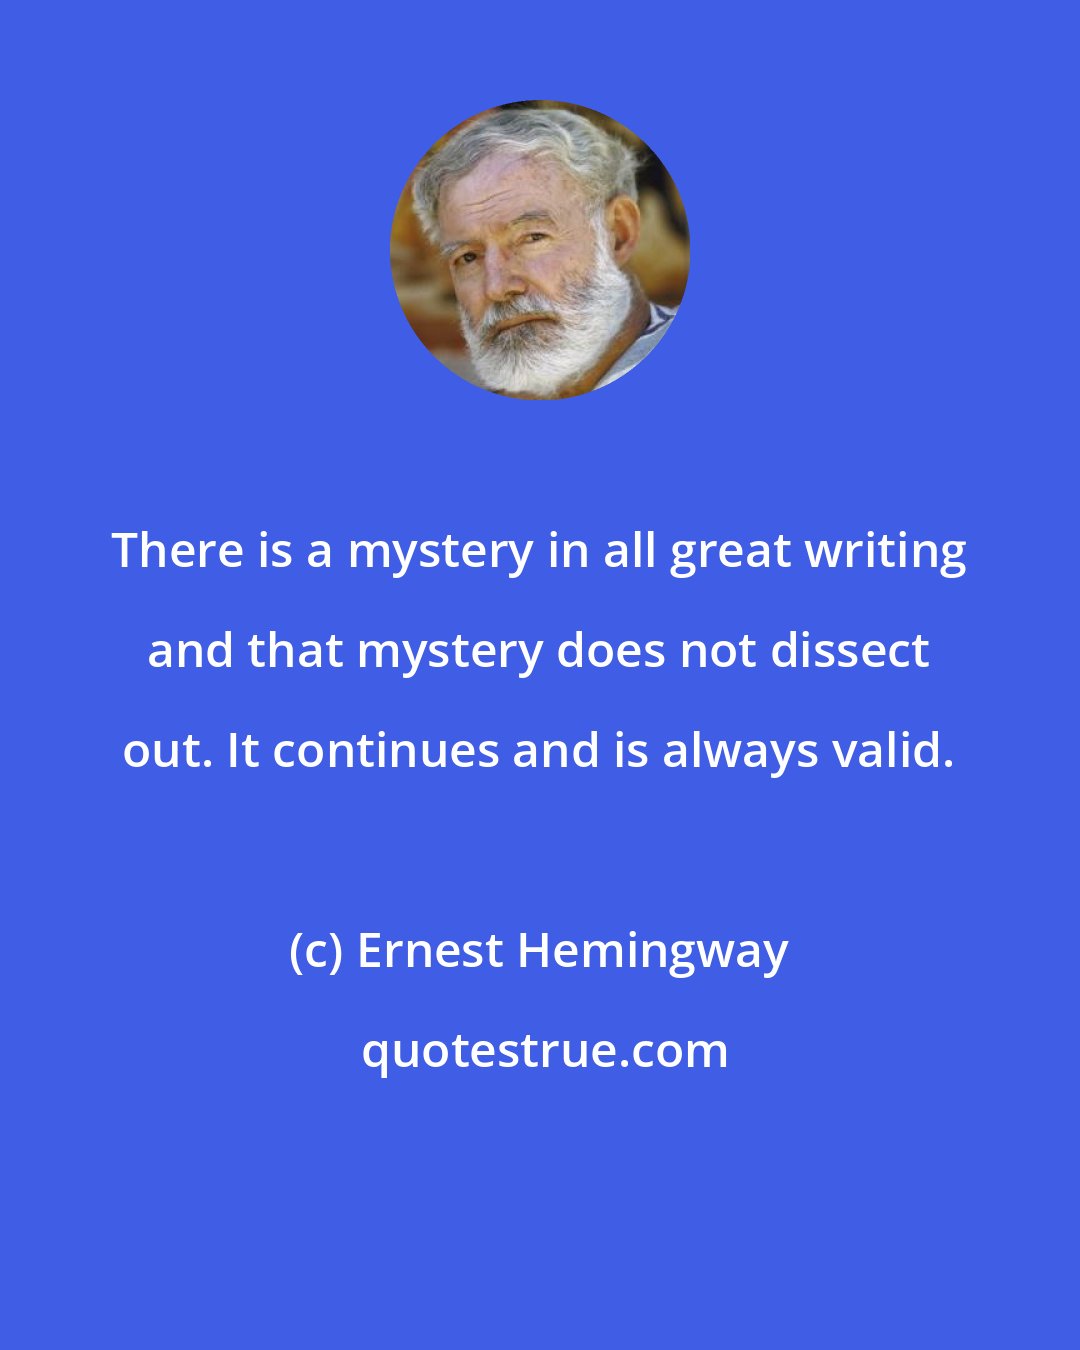 Ernest Hemingway: There is a mystery in all great writing and that mystery does not dissect out. It continues and is always valid.